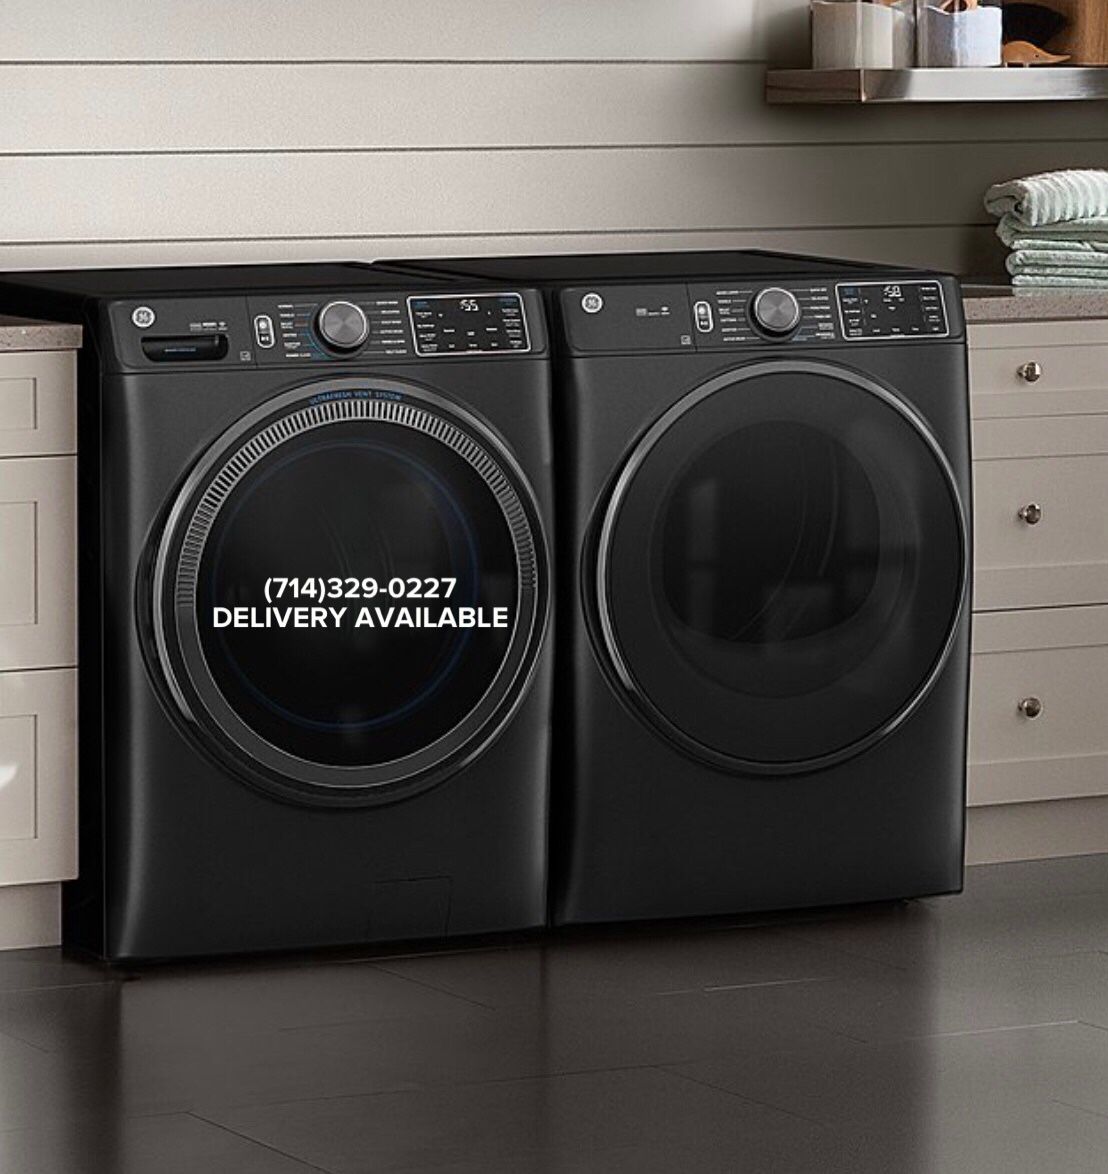 GE BLACK FRONT LOAD WASHER AND GAS DRYER SET